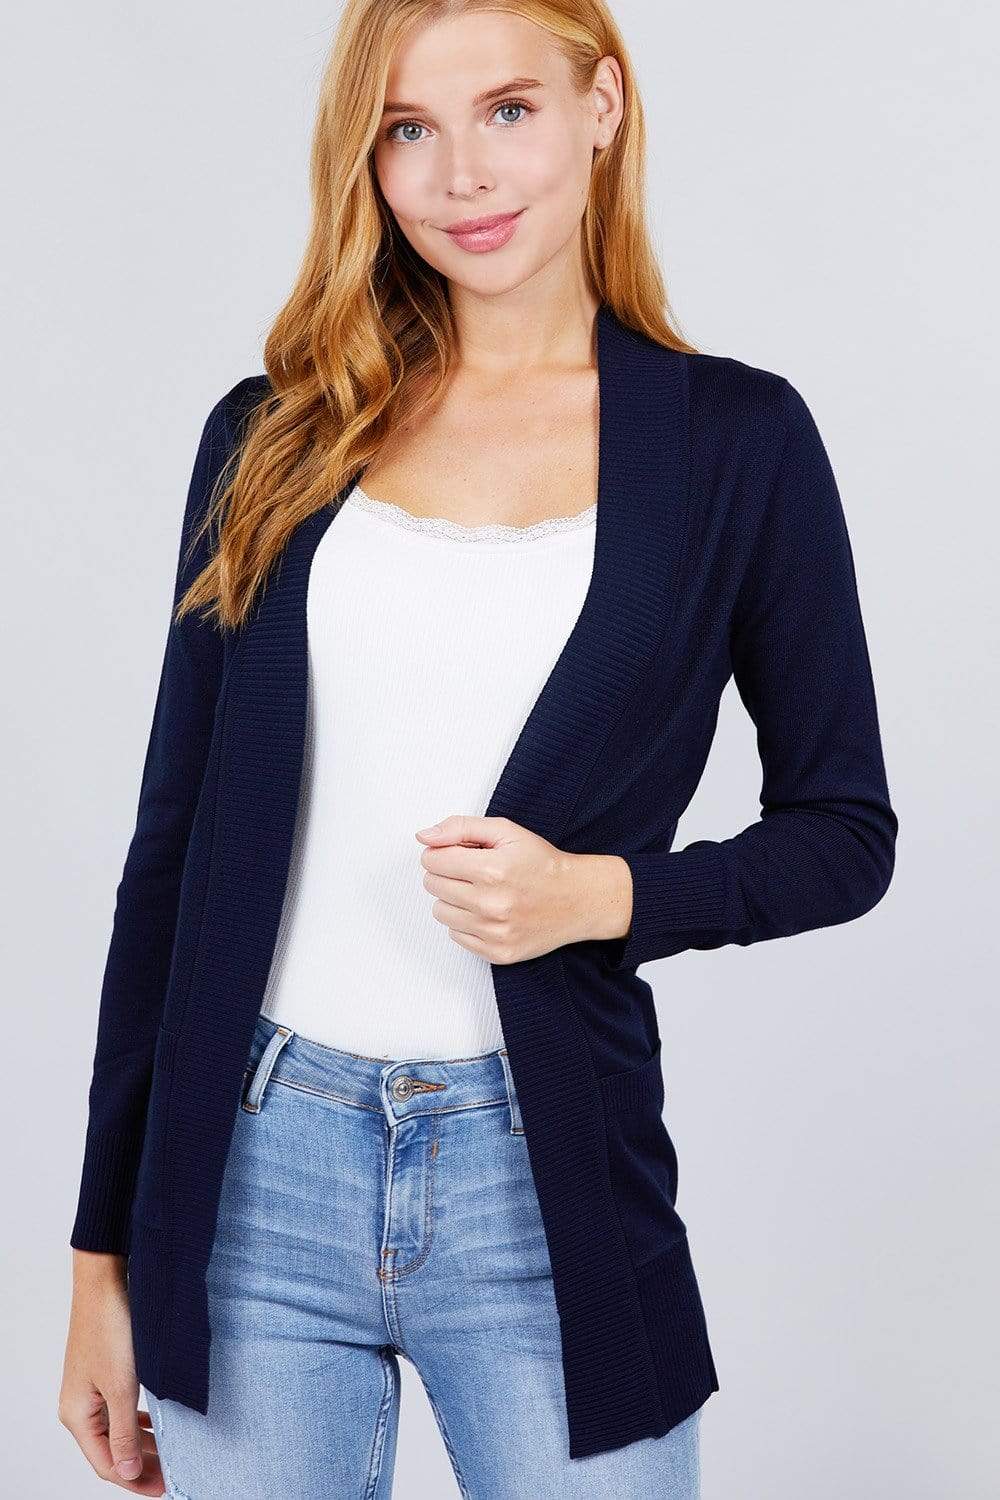 Long Sleeve Rib Banded Open Sweater Cardigan With Pockets-TOPS / DRESSES-[Adult]-[Female]-Dark Navy-S-Blue Zone Planet